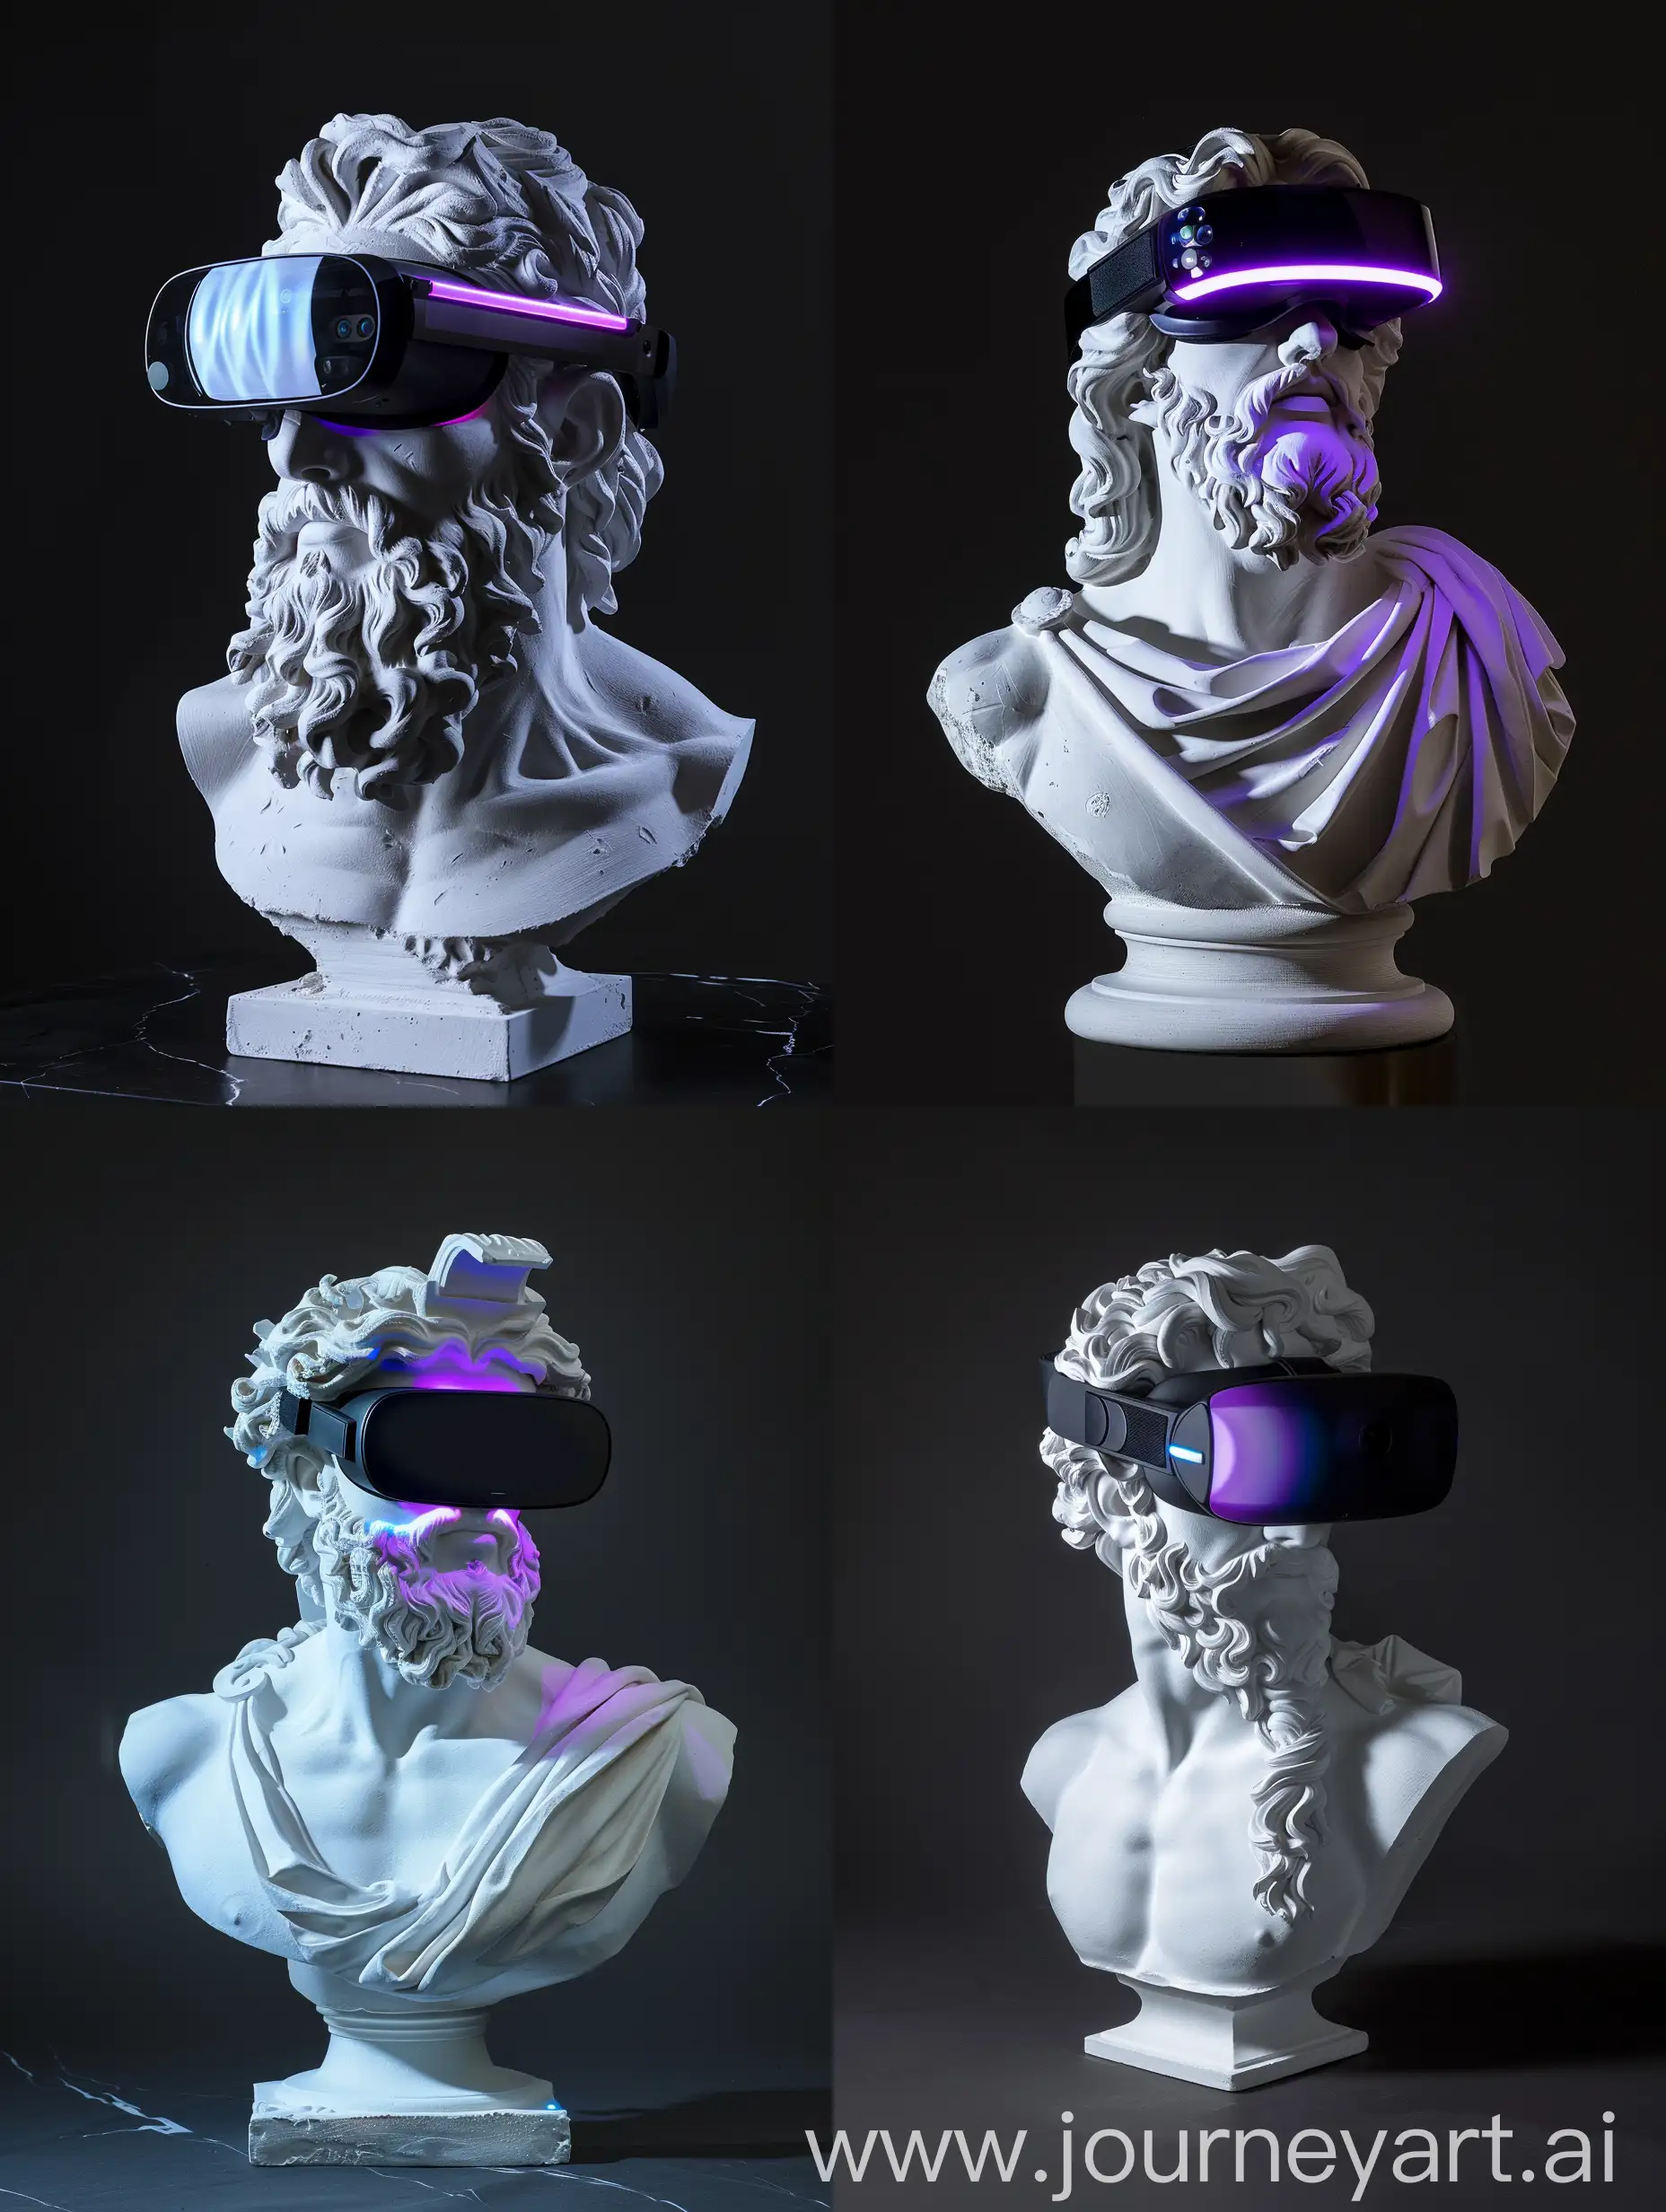 Modern-Plaster-Sculpture-of-Zeus-with-VR-Glasses-and-White-Light-Reflections-on-Black-Background